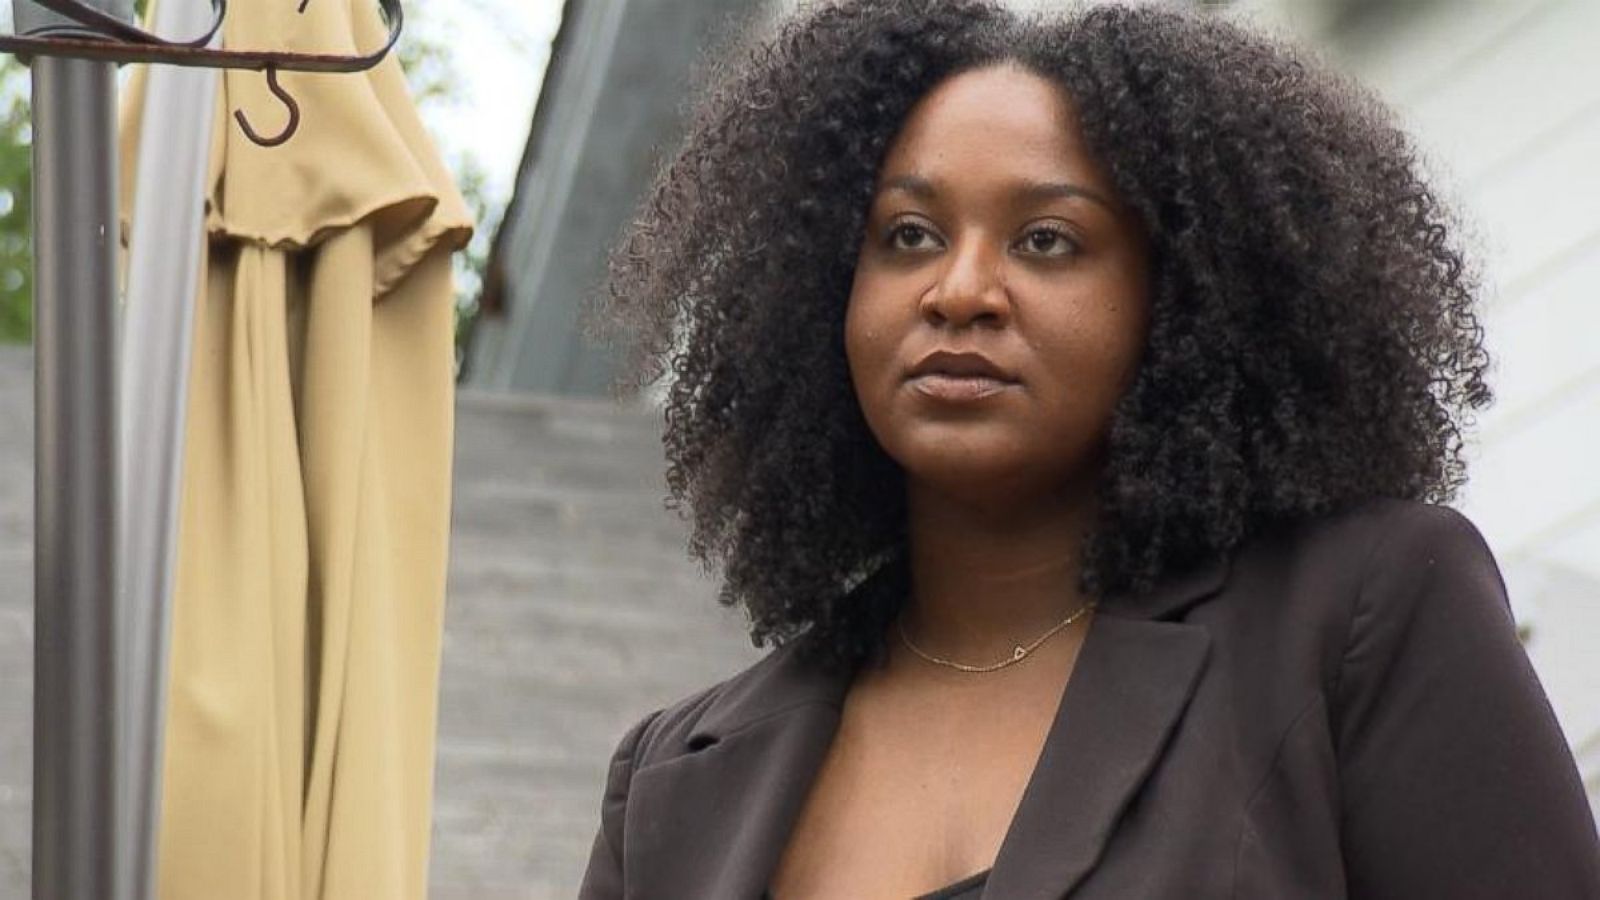 When Being Curvy Hurts: One Black Woman's Severe Struggle With Body Image -  ABC News